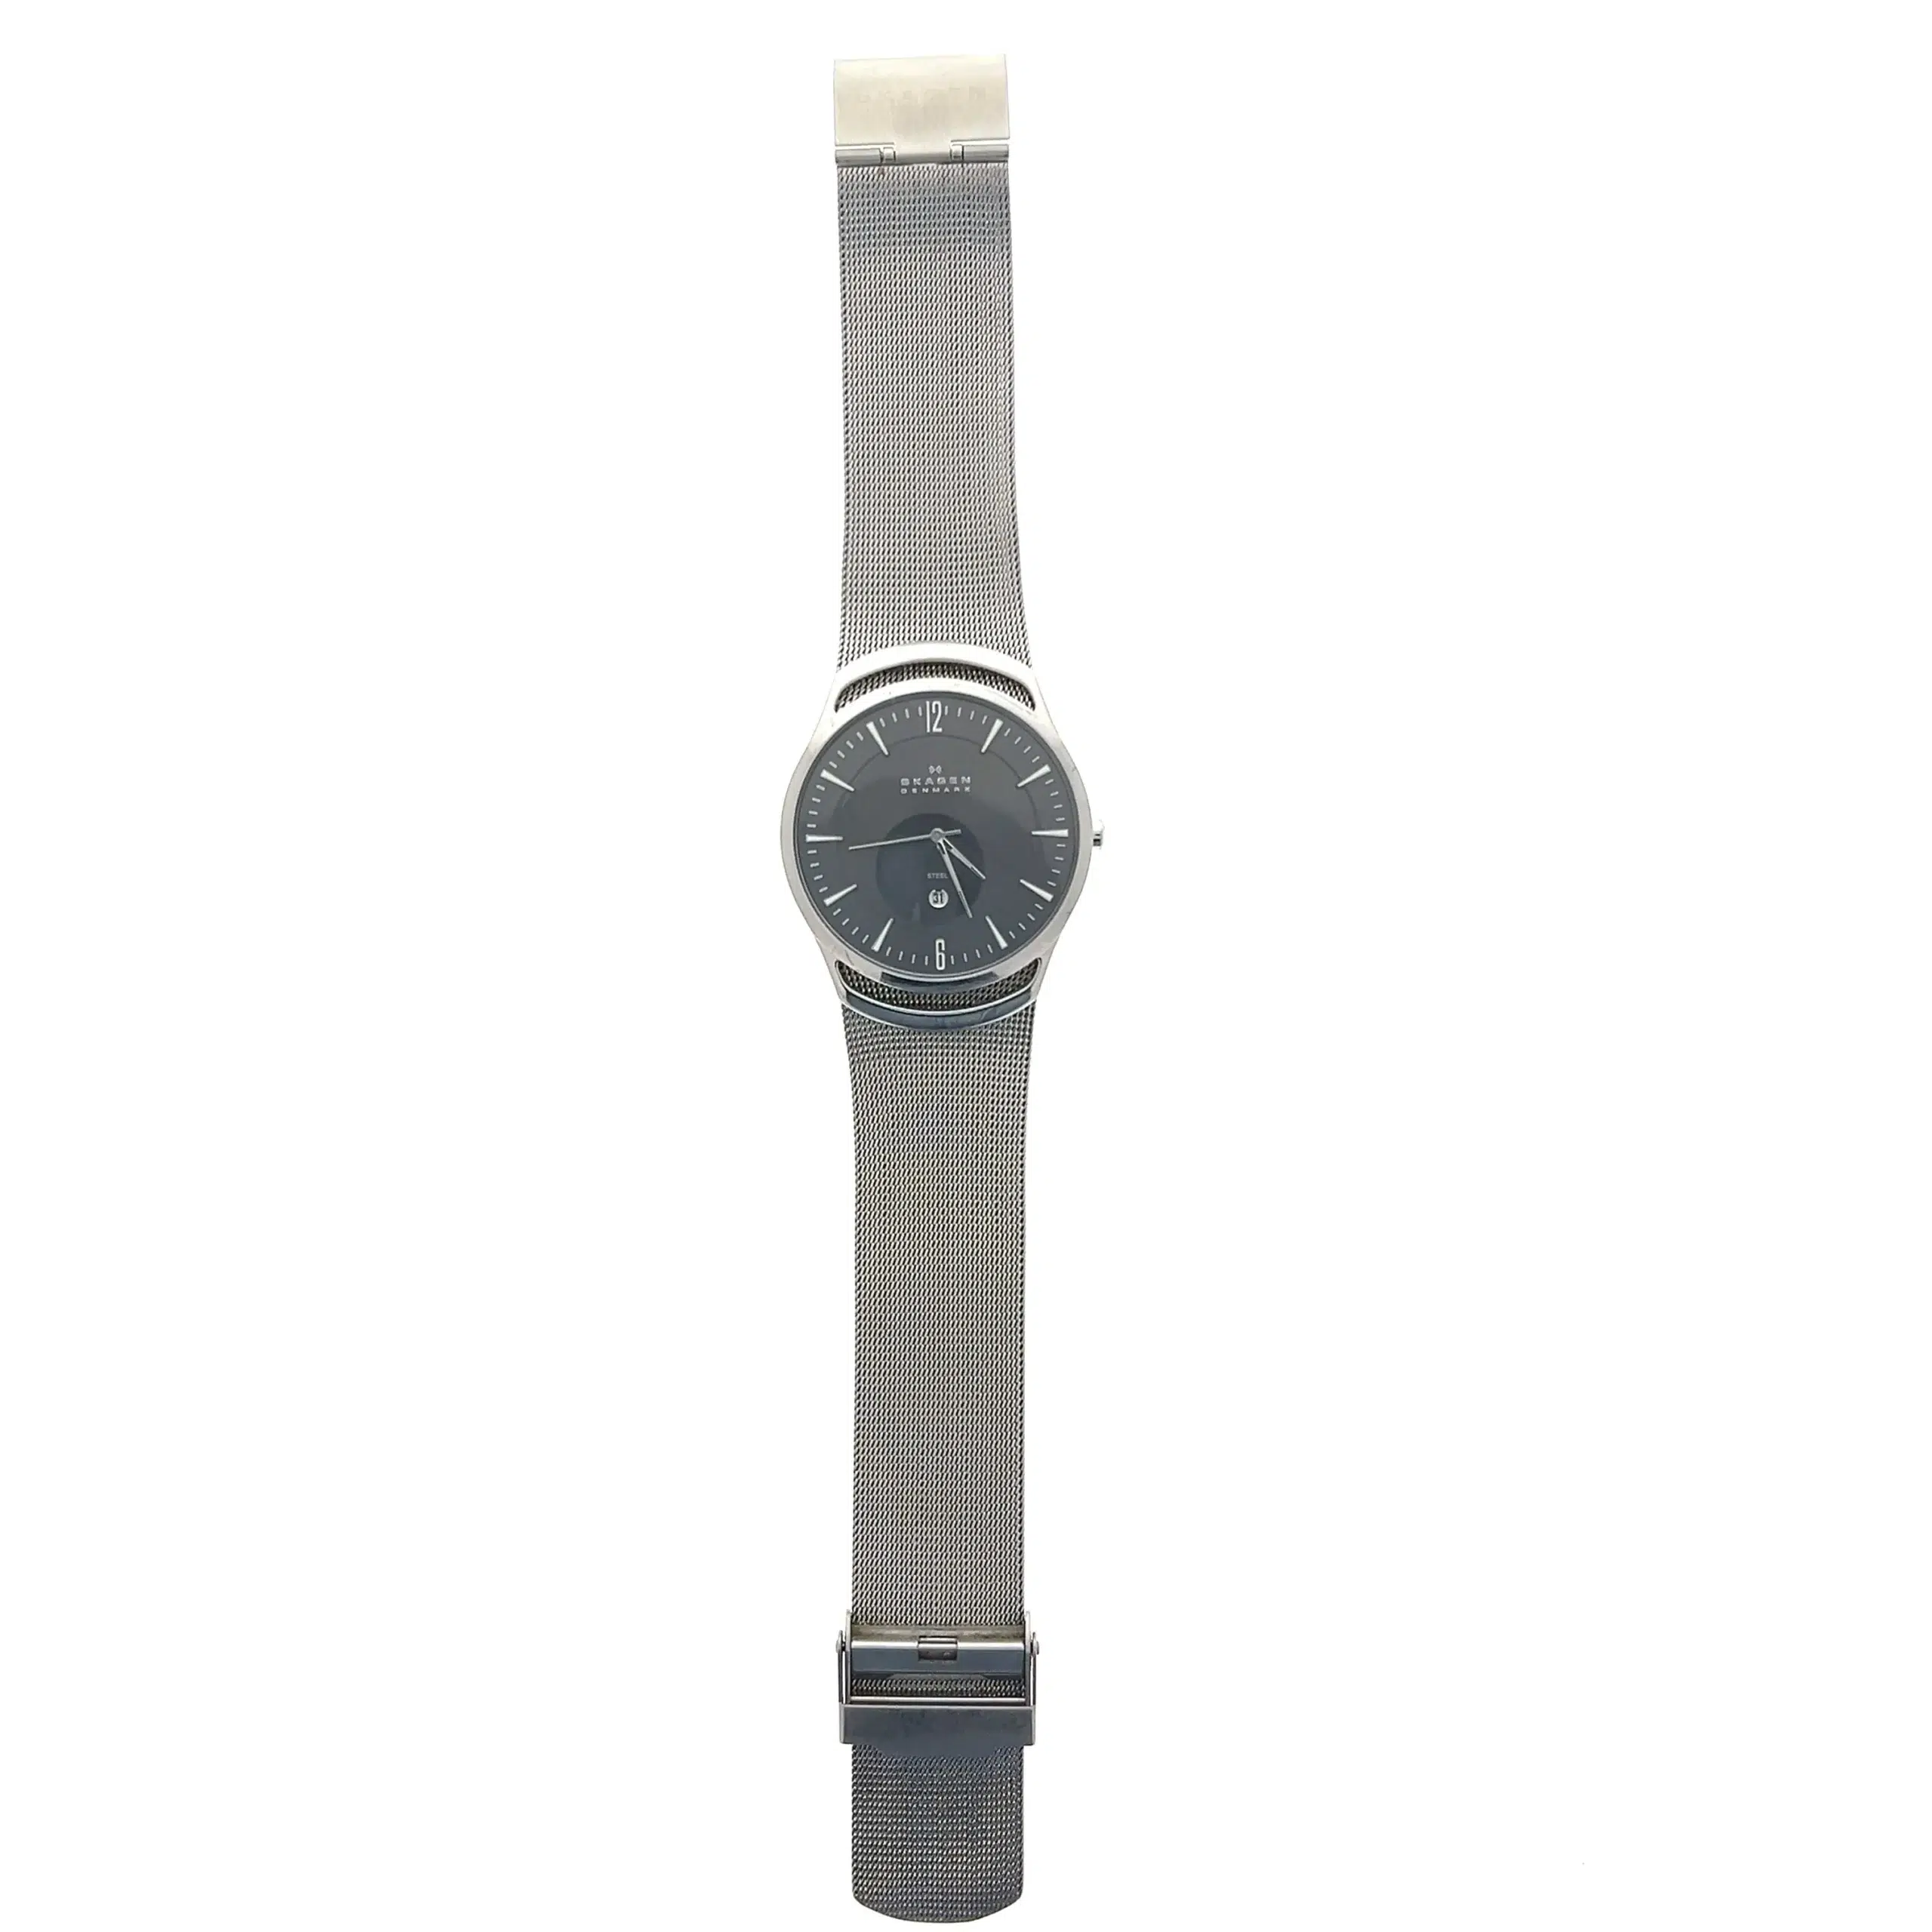 One stainless steel Skagen watch with a 40mm round silver-tone case, a dark gray dial, minimalist hour and minute markers with Arabic numerals at 6 and 12 o'clock, a date display window near the 6 o'clock location, and a silver-tone mesh bracelet.